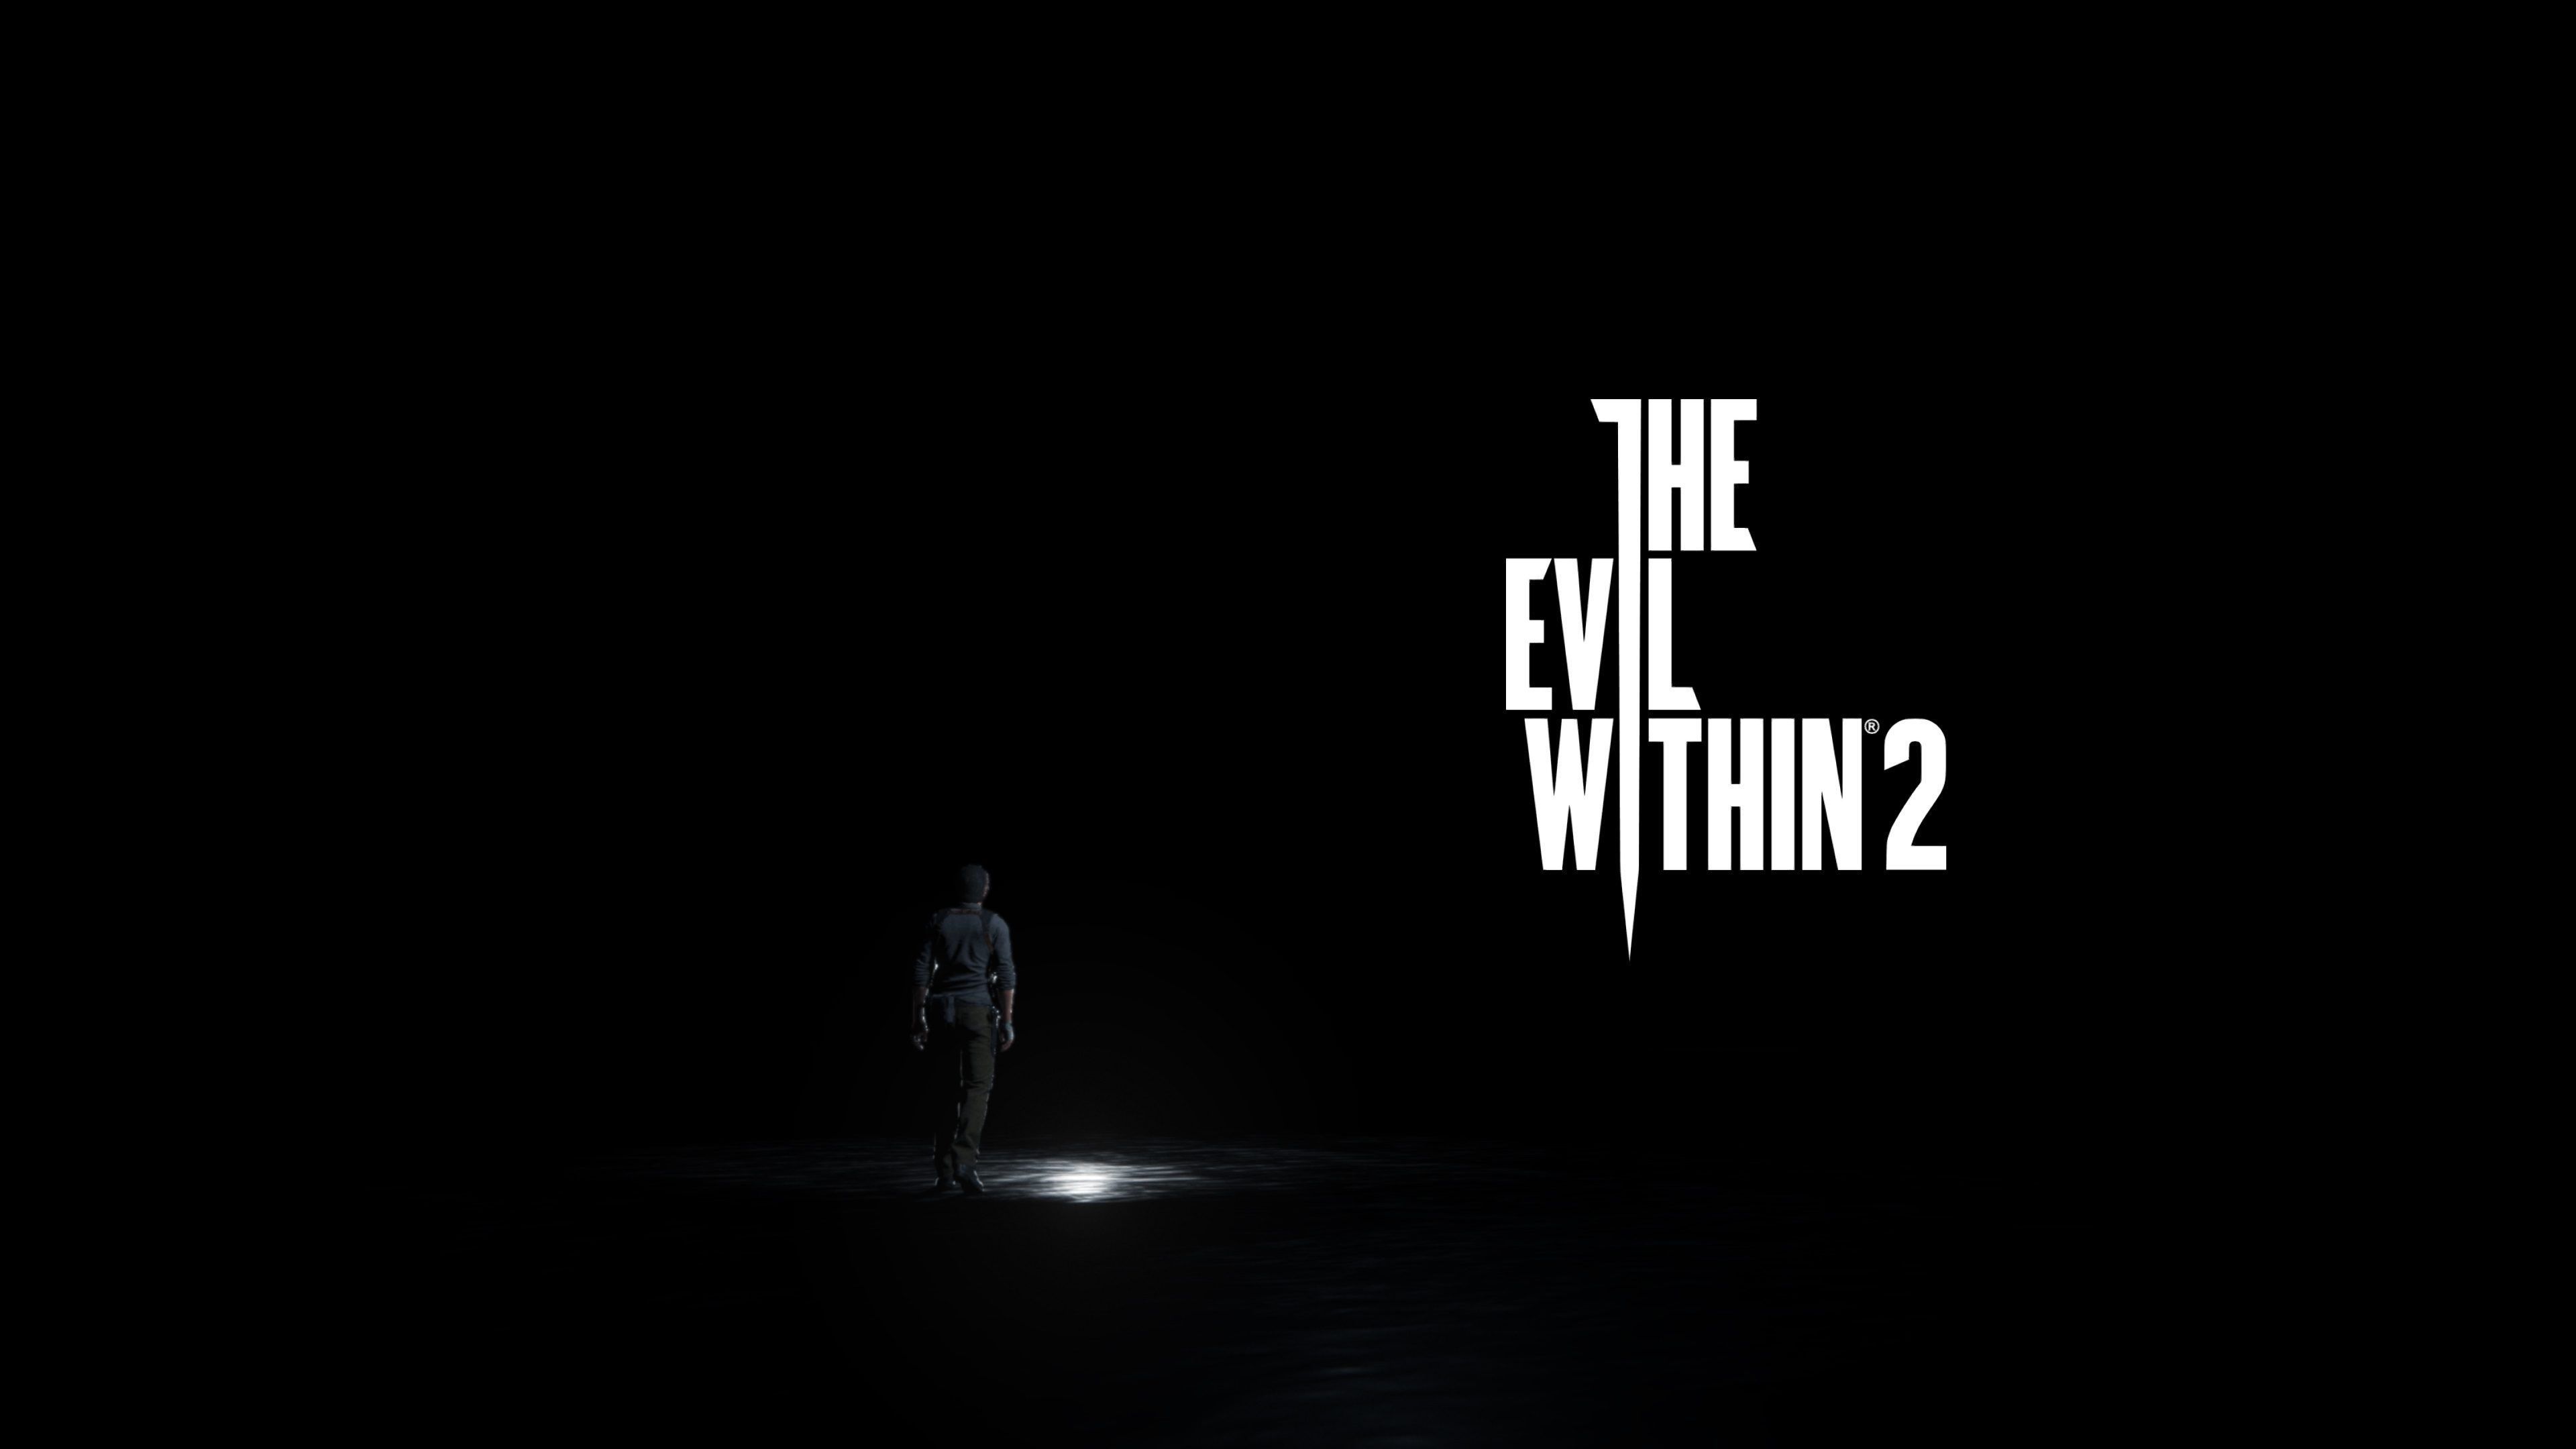 the evil within 2 4k HD wallpaper background free